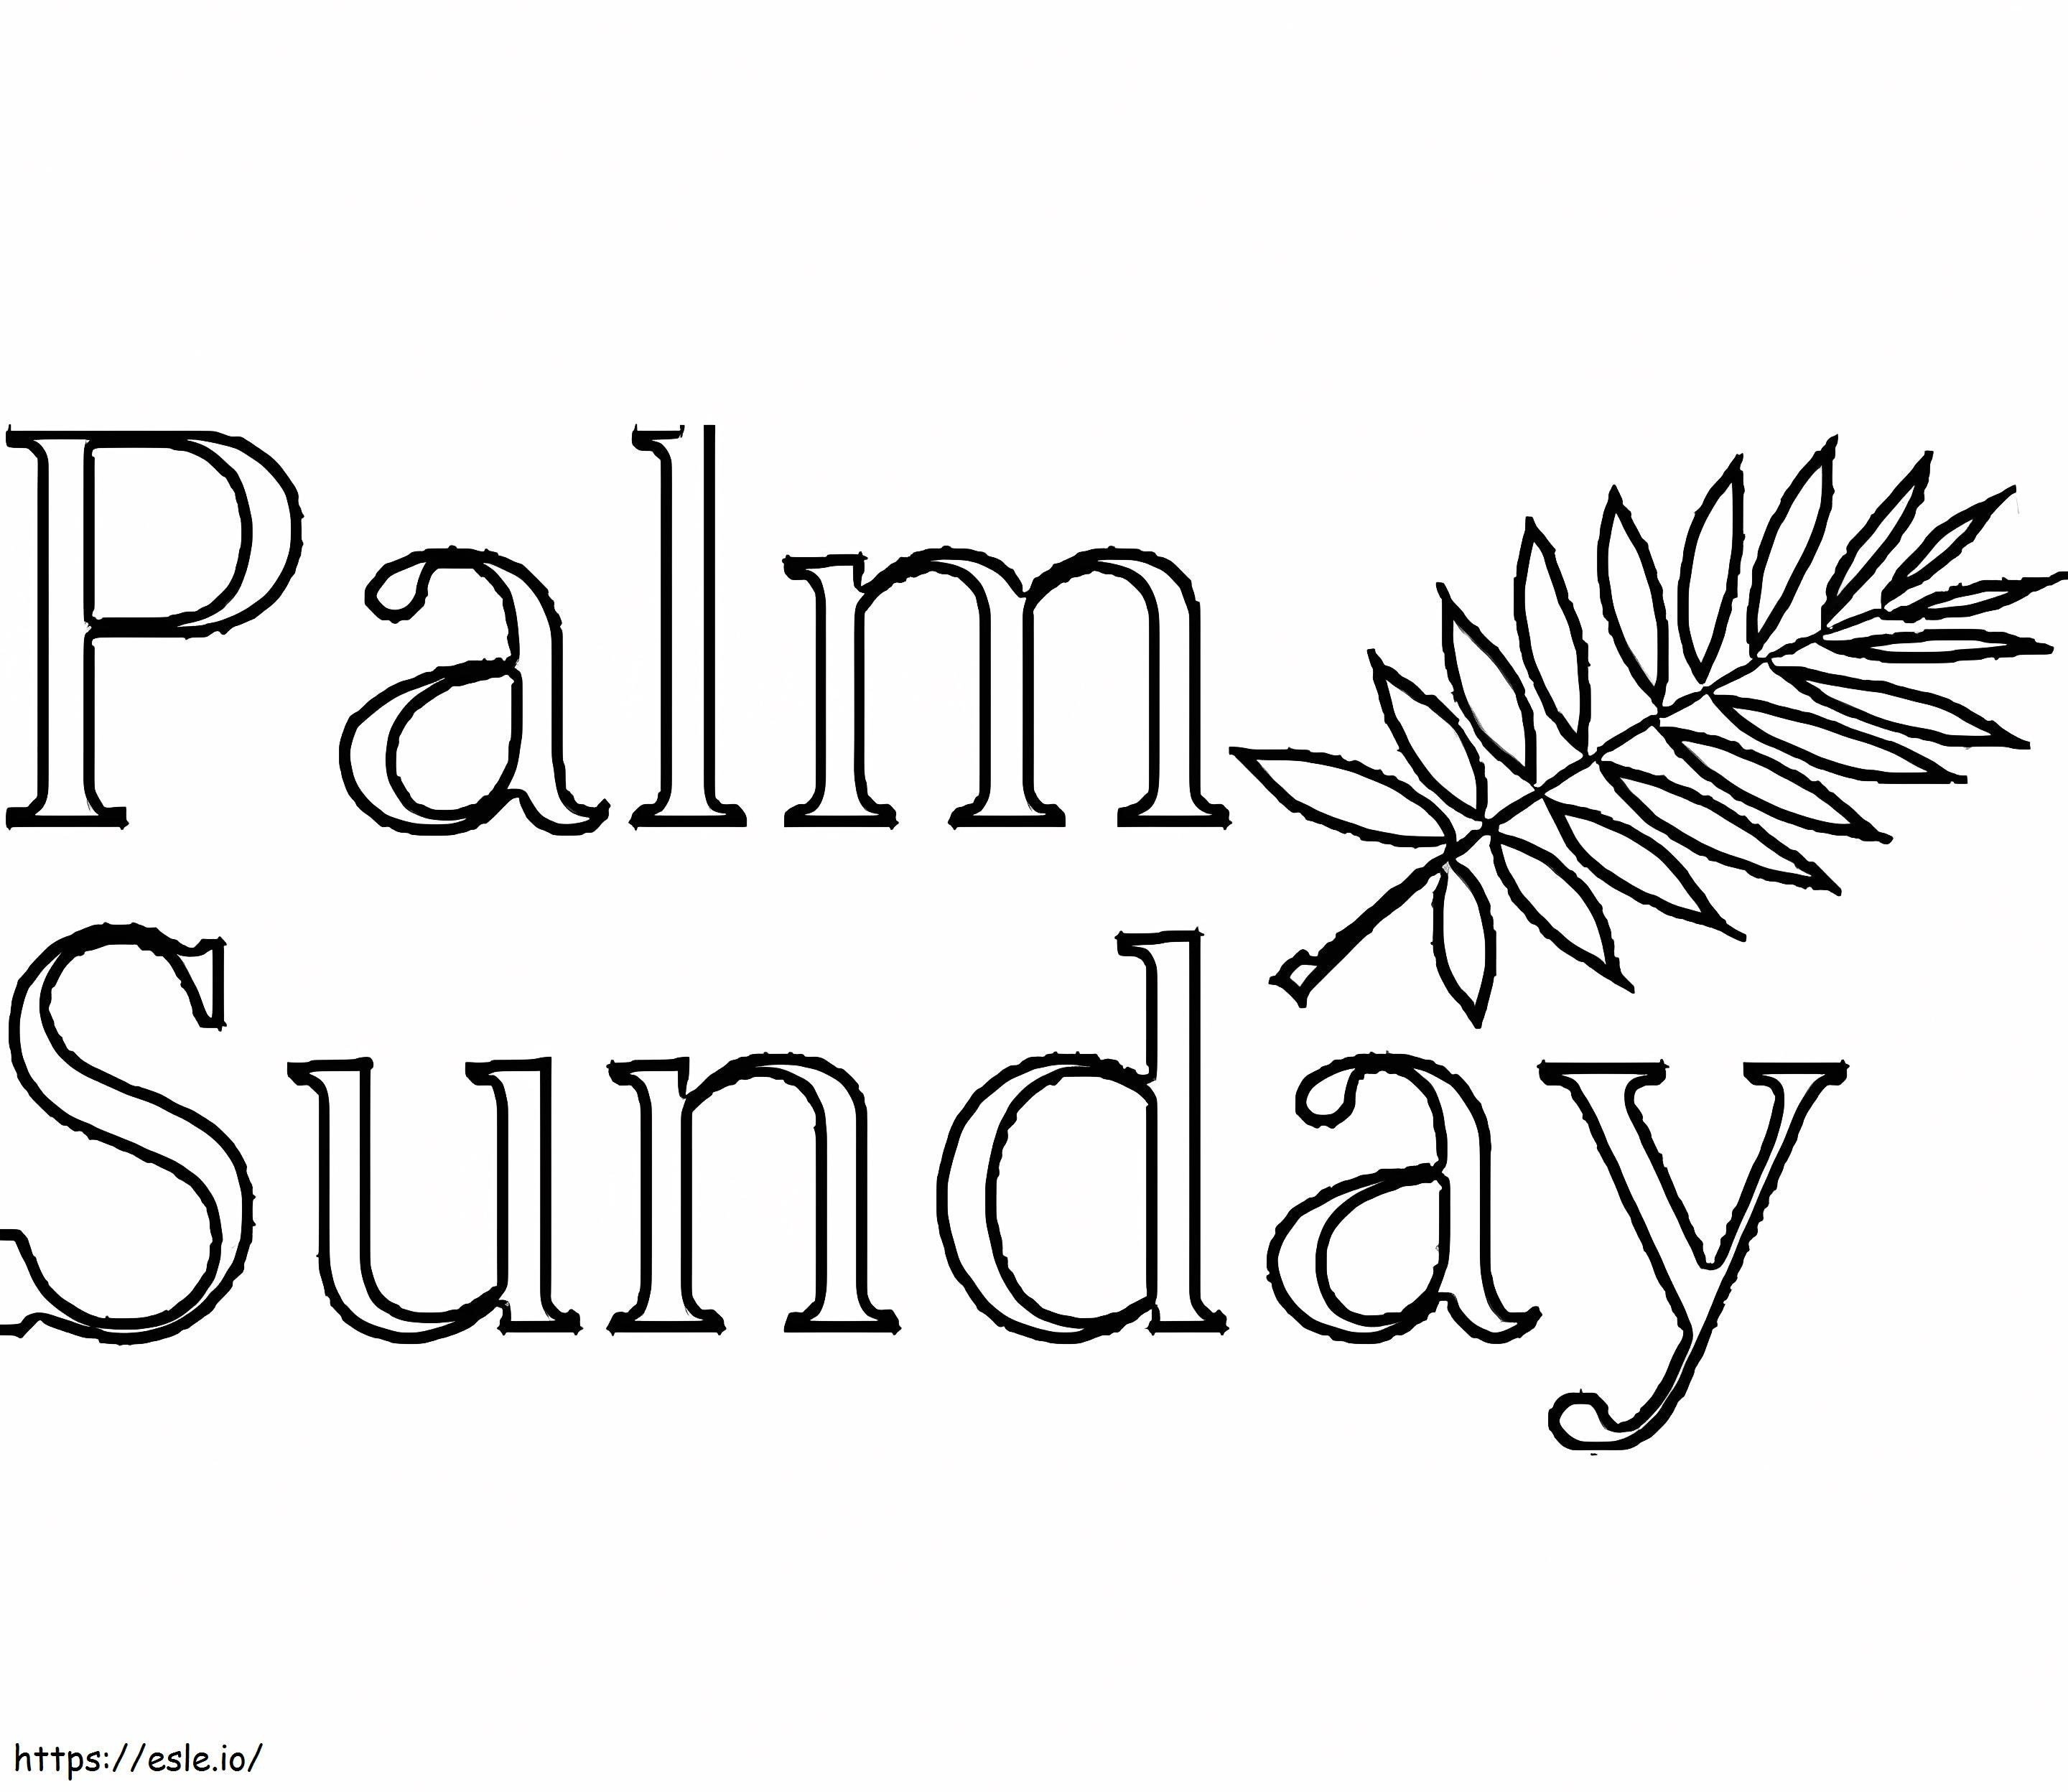 Palm Sunday 10 coloring page